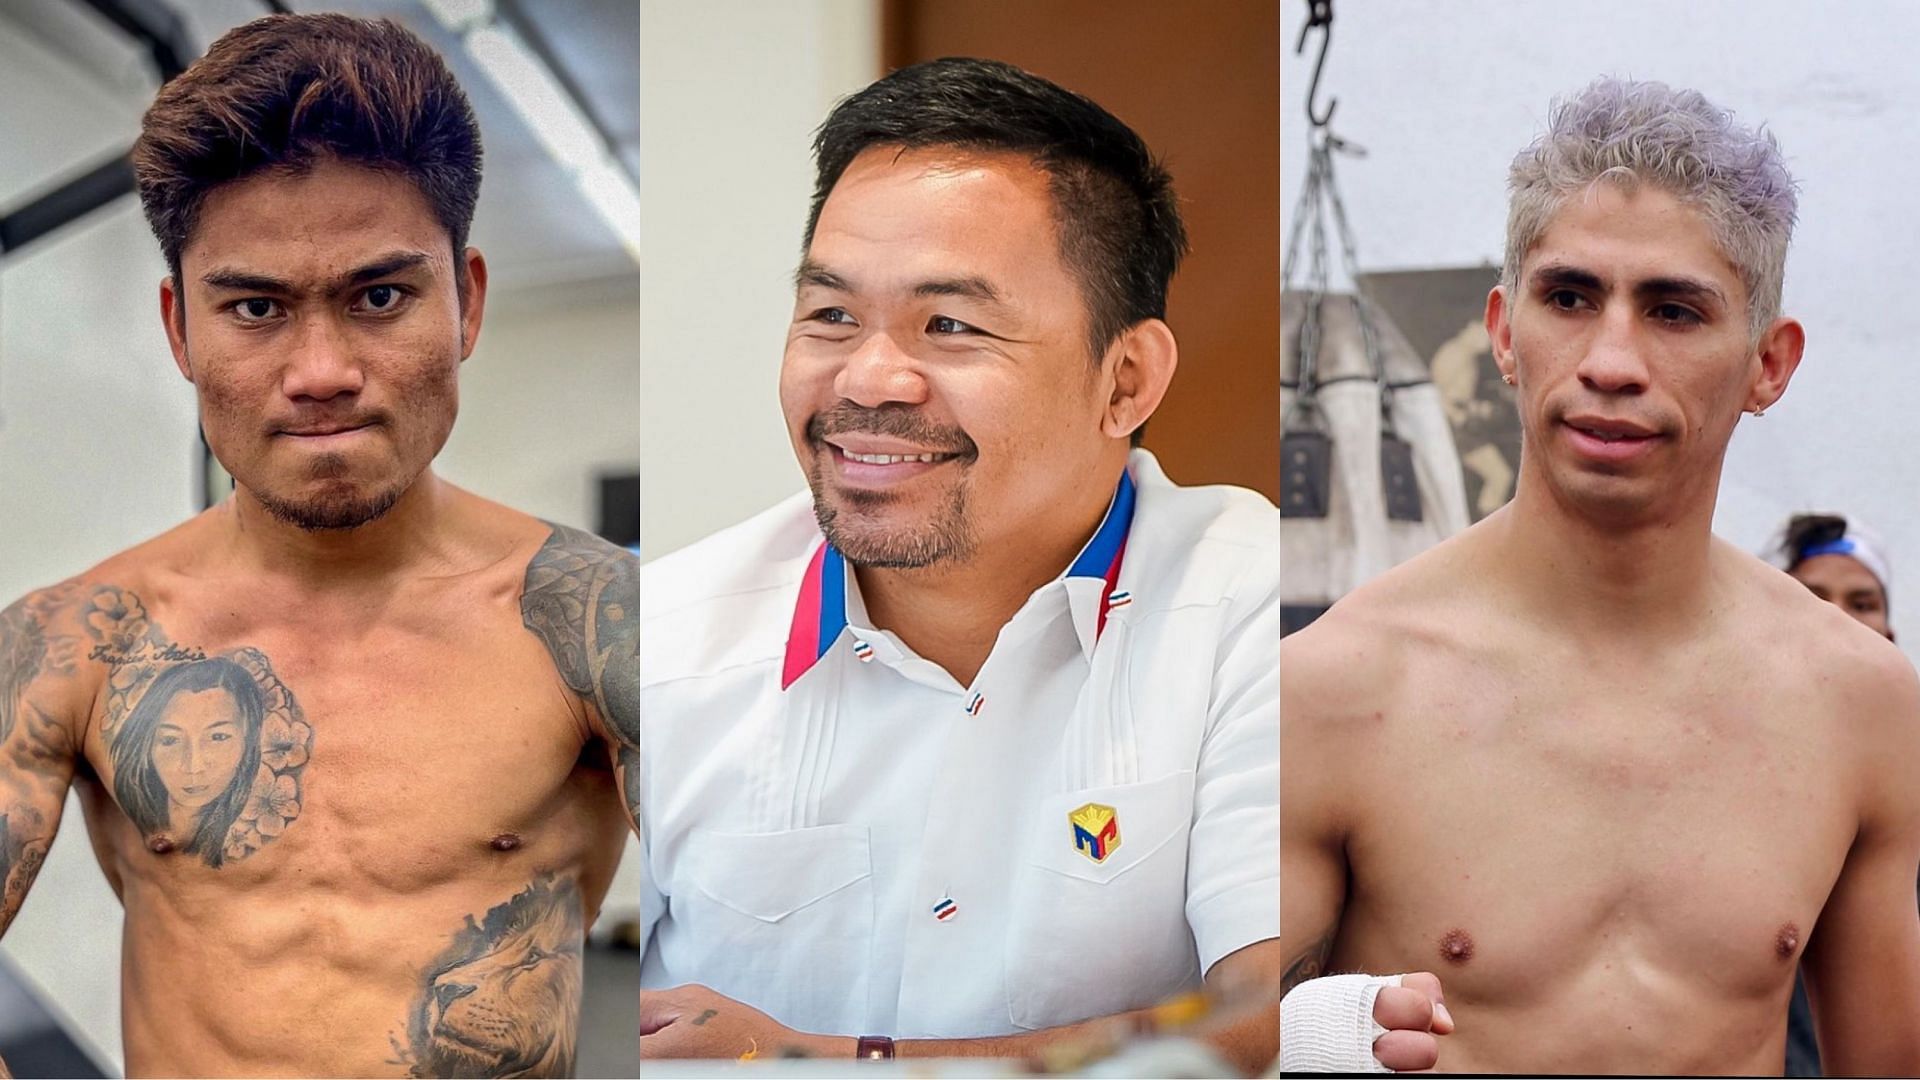 Mark Magsayo (left, @markmagnificomagsayo), Manny Pacquiao (center, @mannypacquiao), Rey Vargas (right, @rey.vargas.boxing) [images courtesy of Instagram]